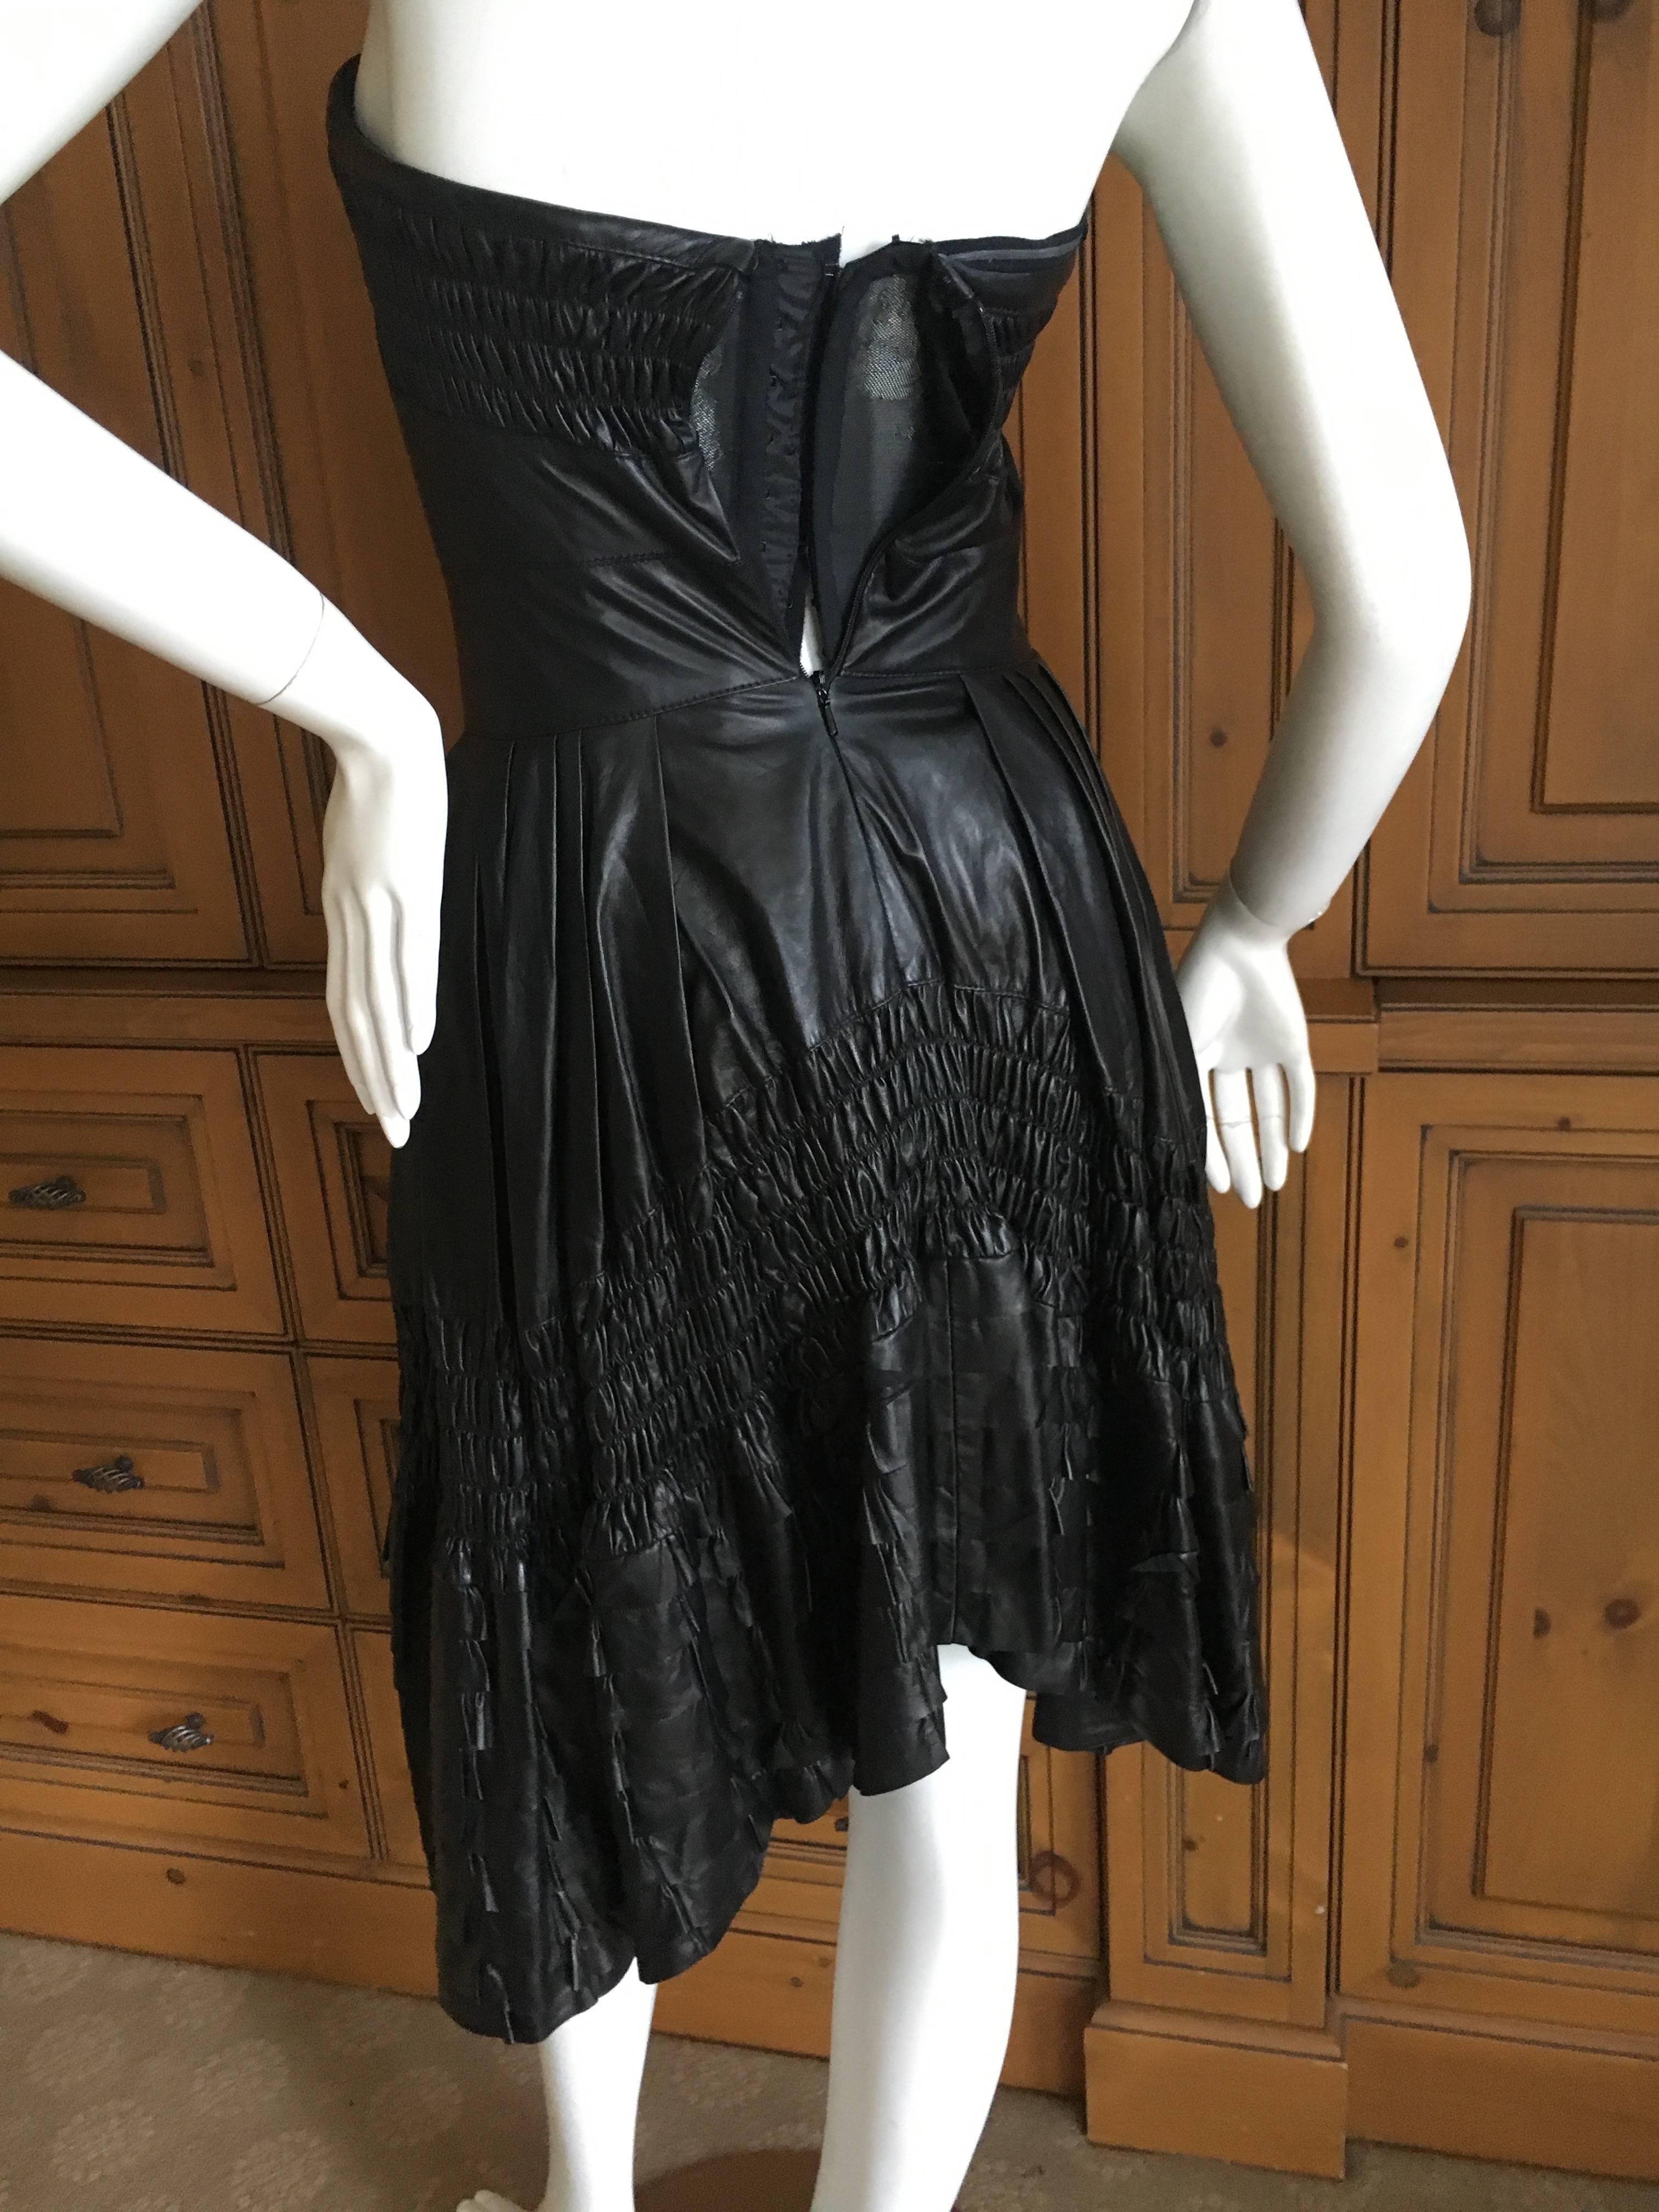 Christian Dior by John Galliano Fall 2010 Black Leather Pleated Ruffle Dress For Sale 5